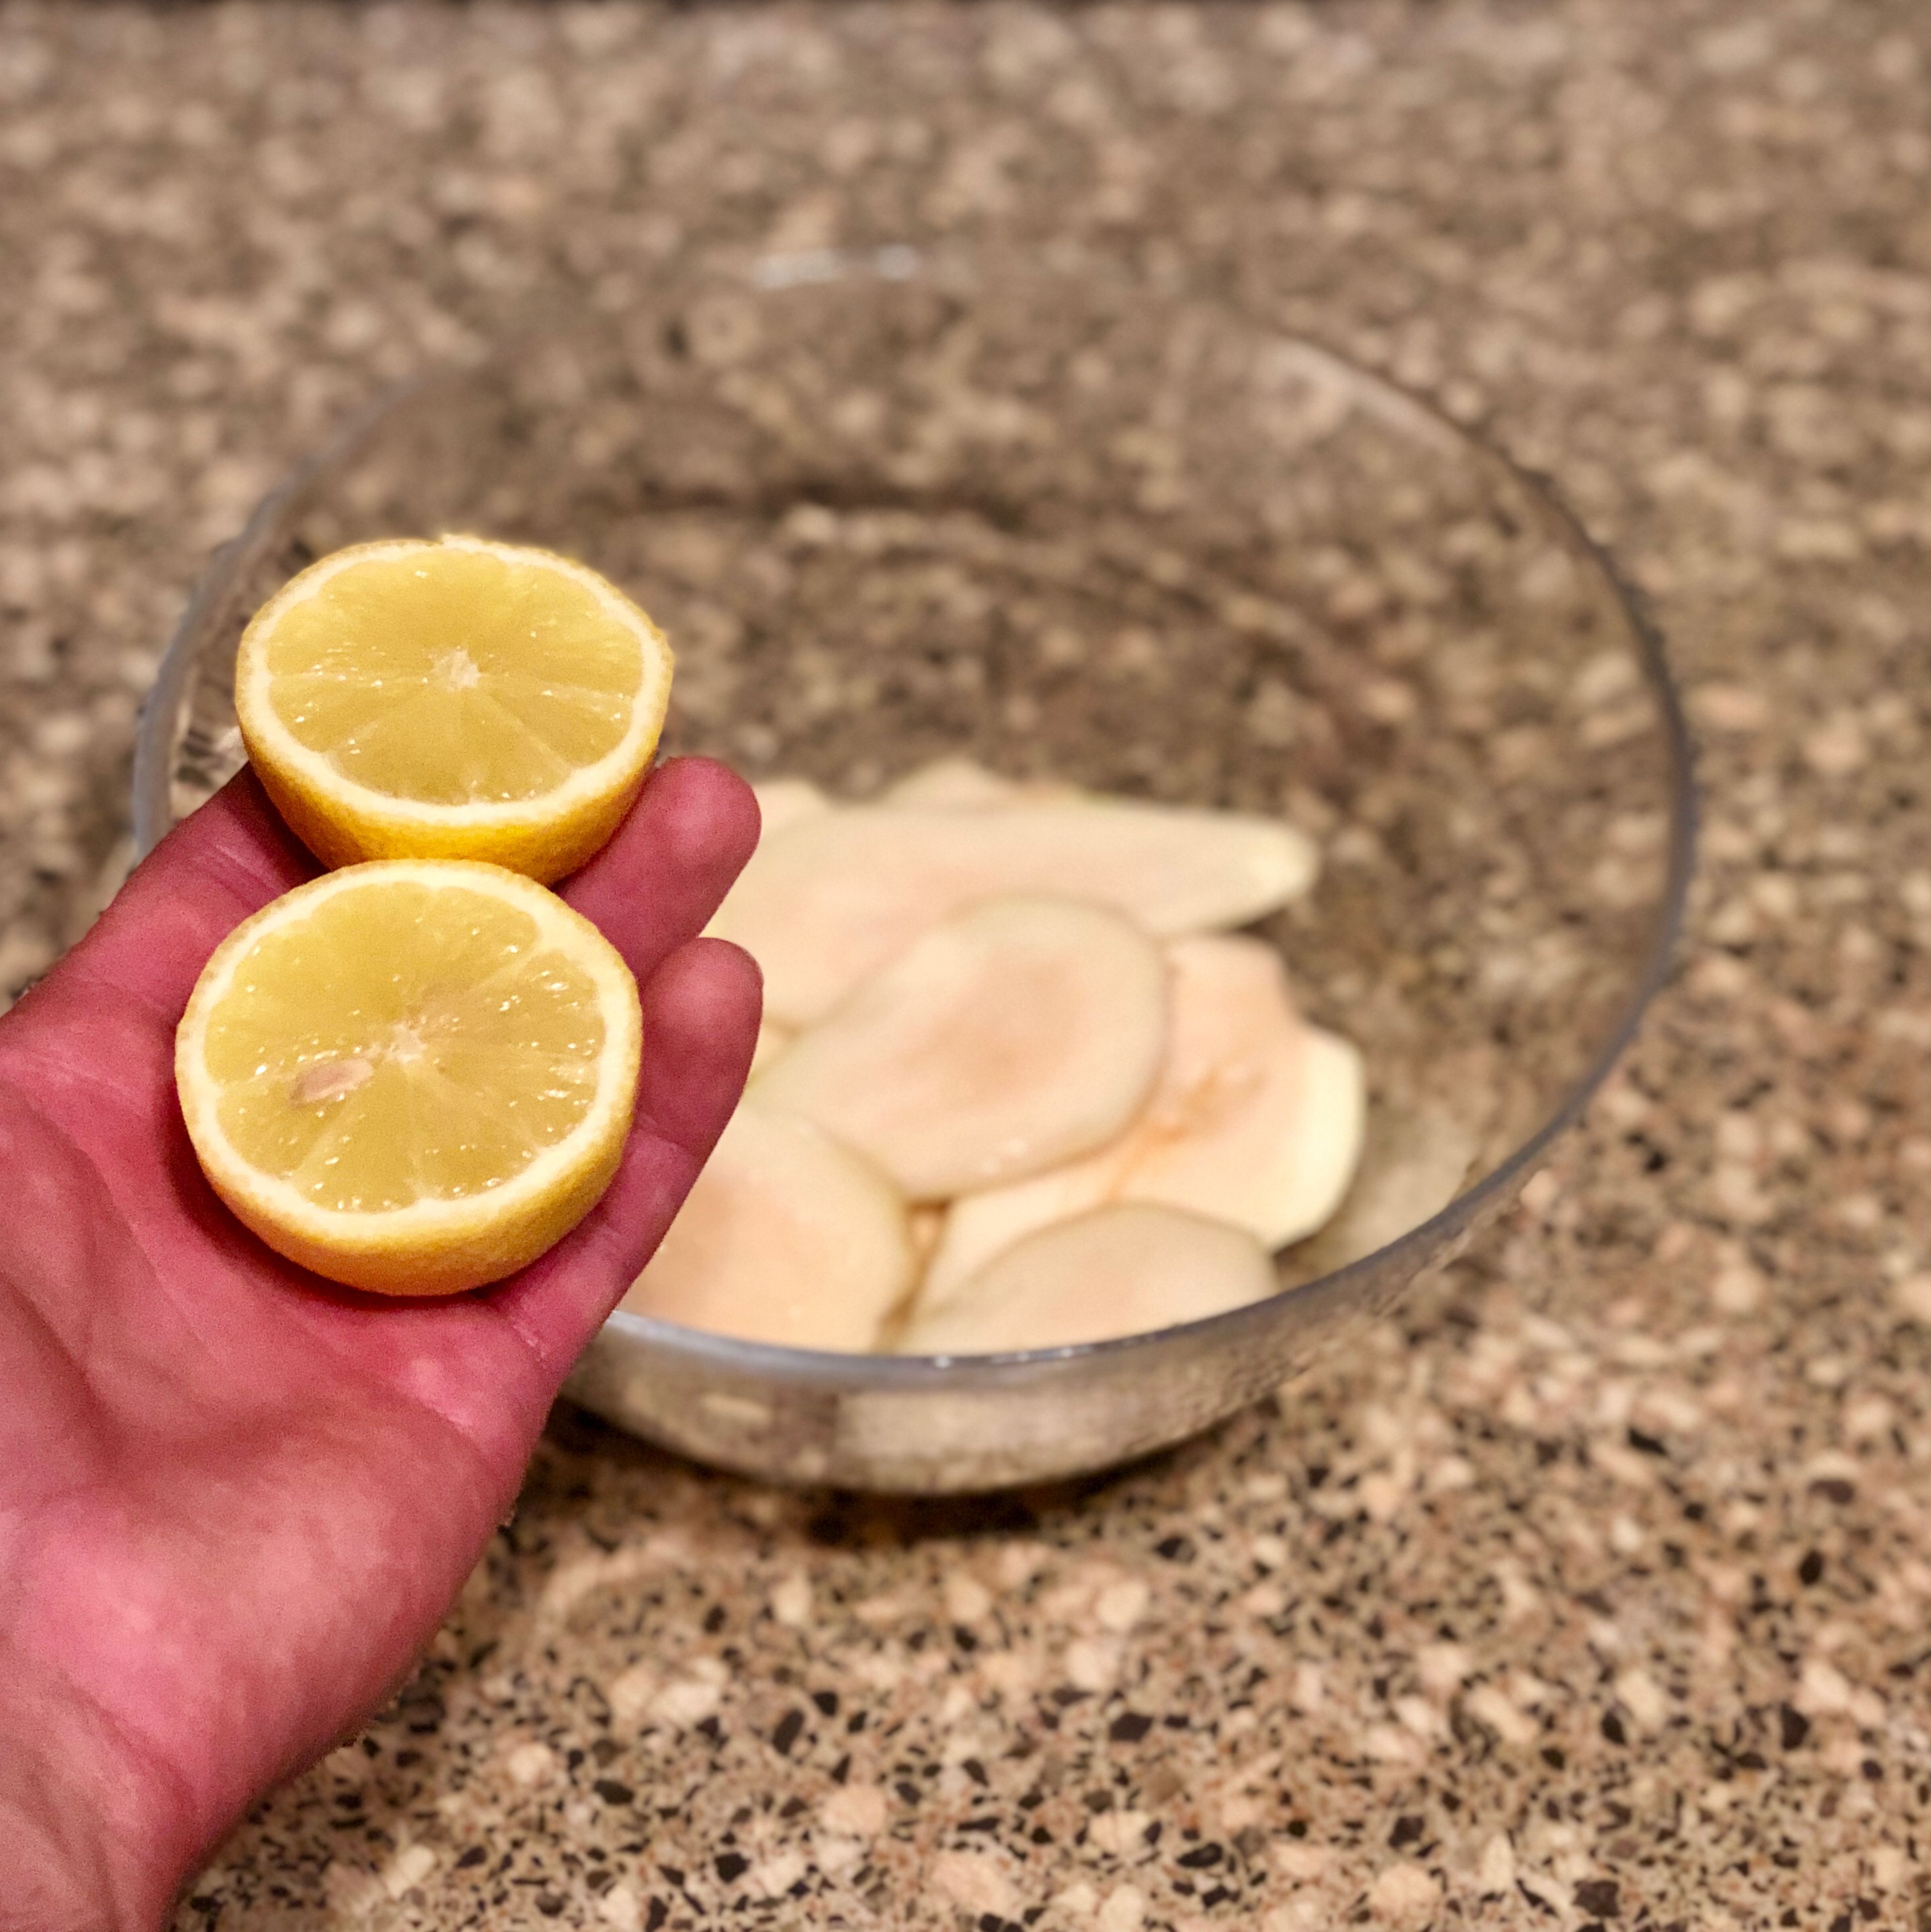 Sprinkle already sliced pears with lemon juice and leave aside.